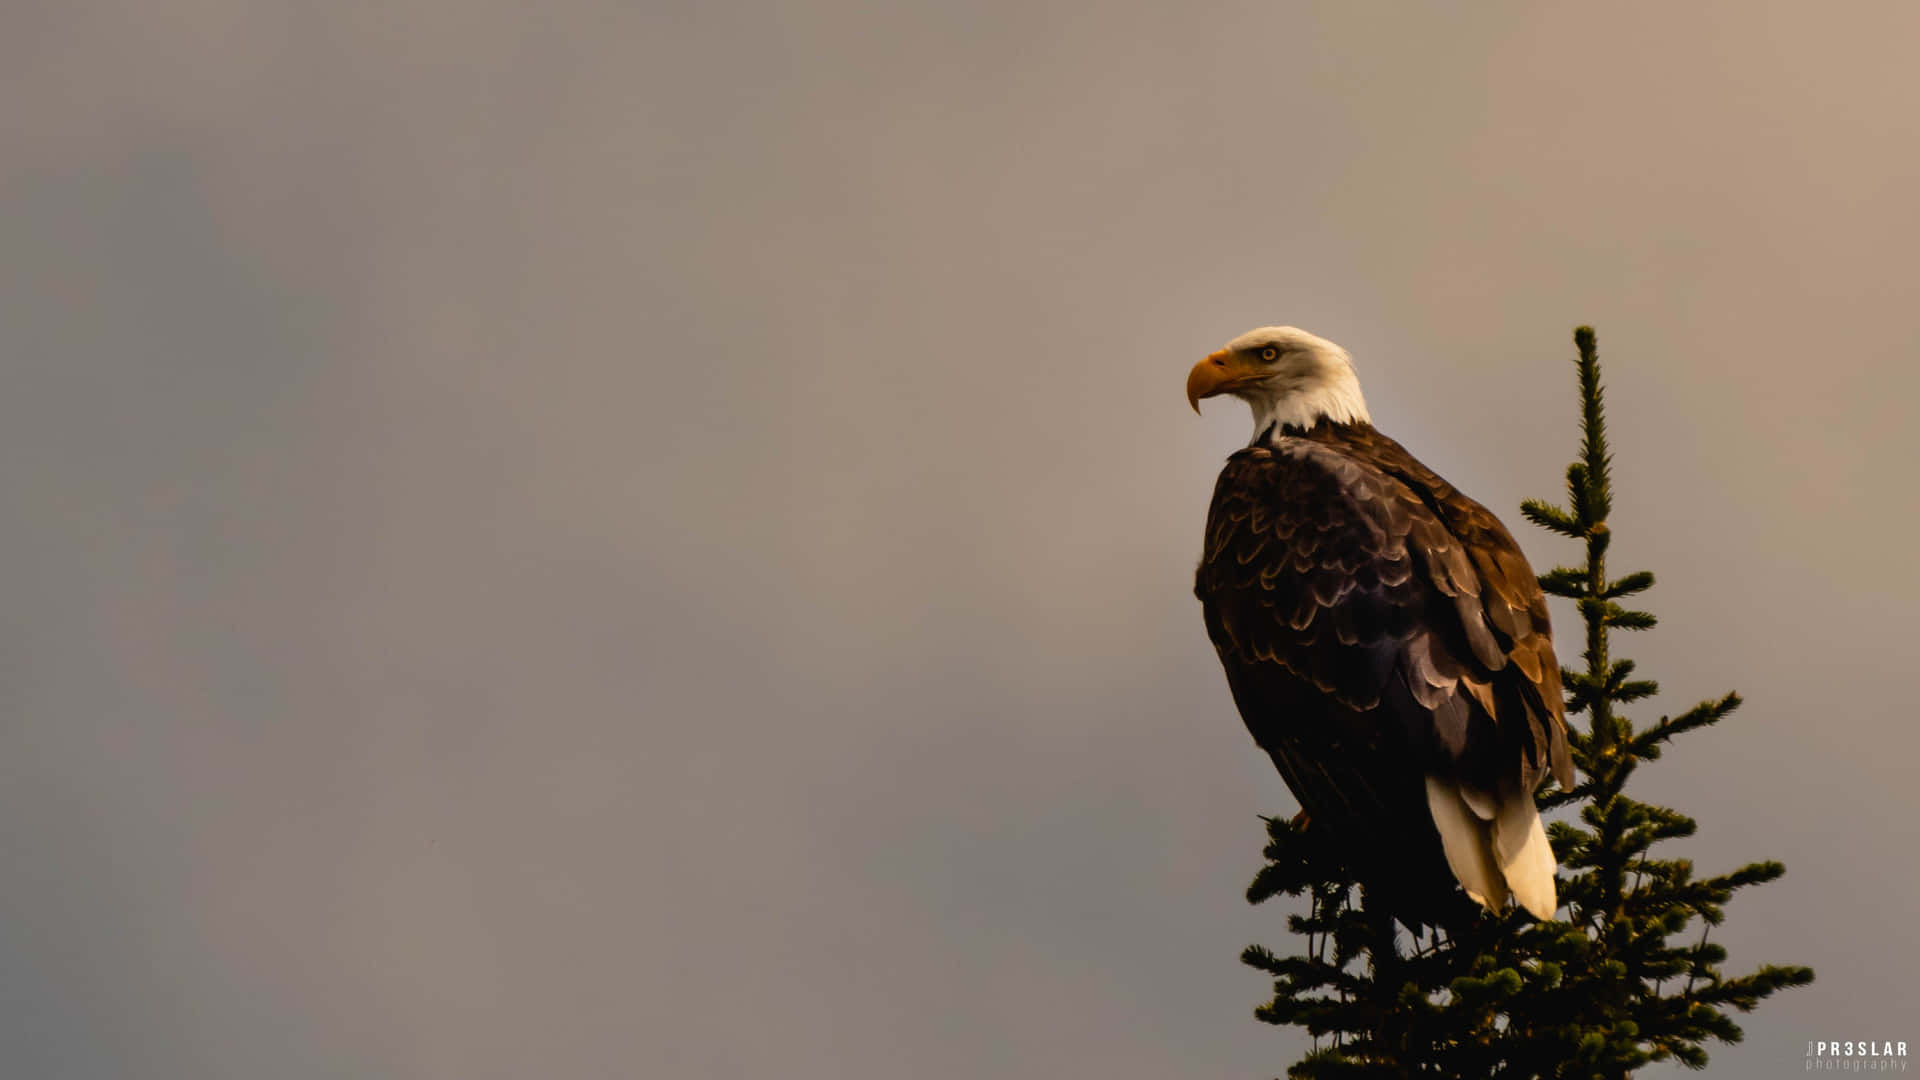 Caption: Majestic Bald Eagle Perched On A Branch Wallpaper